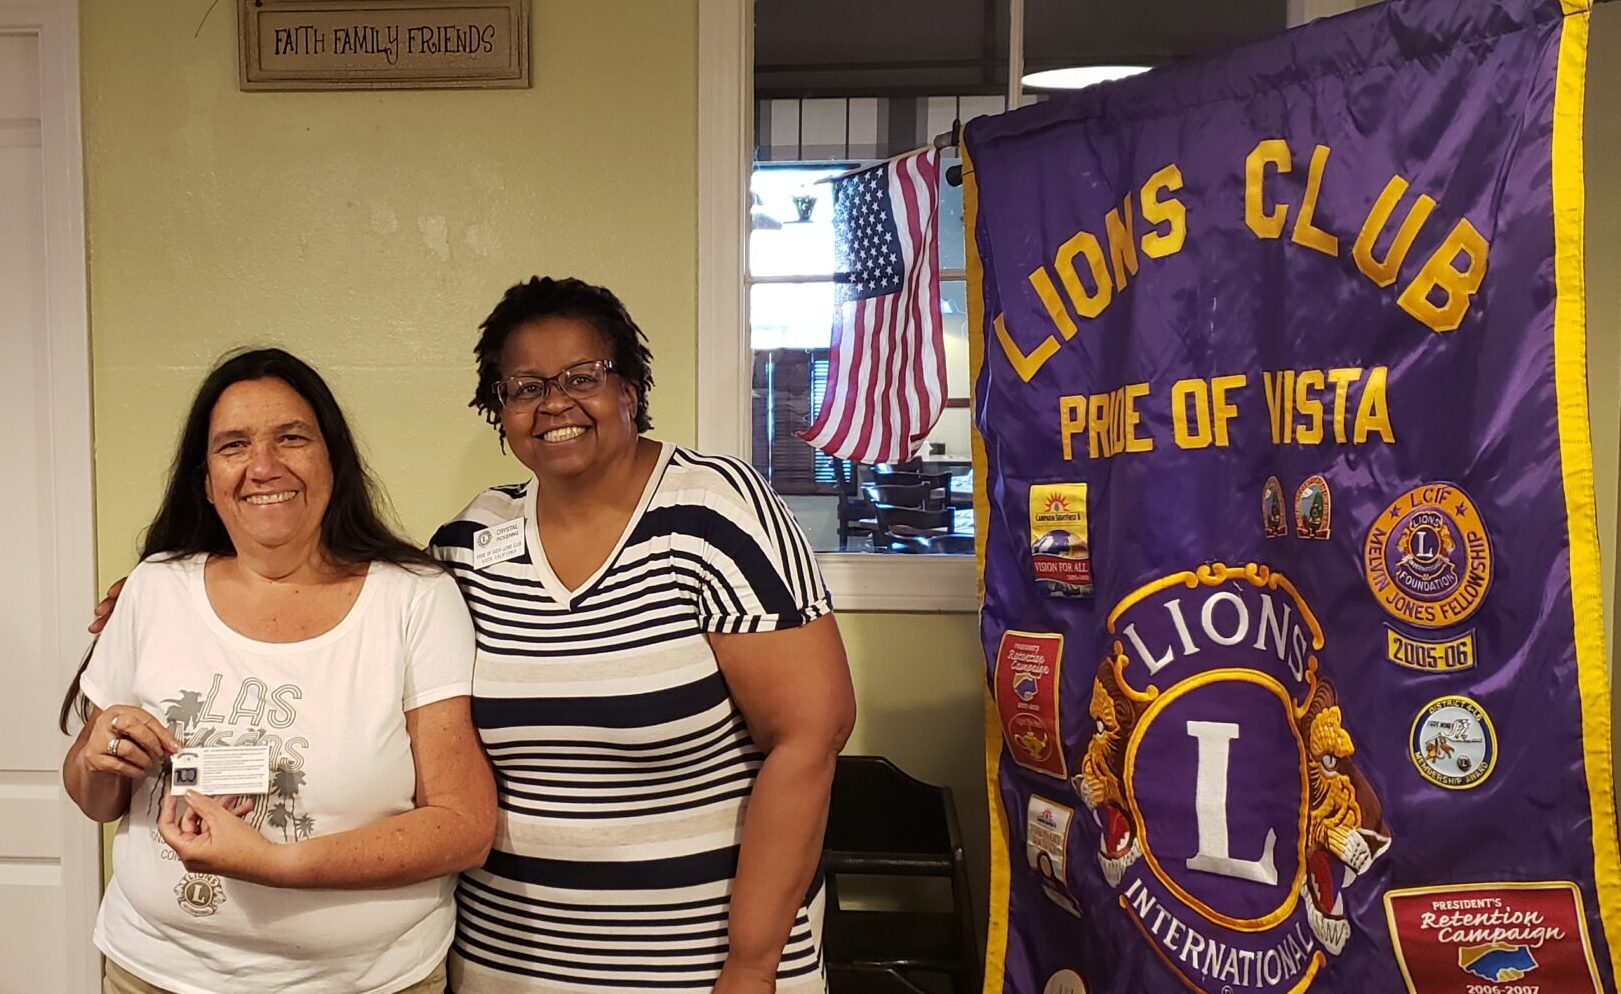 Lion President Crystal (R) giving an award to Lion Anita for most new members sponsored in our 100th year.